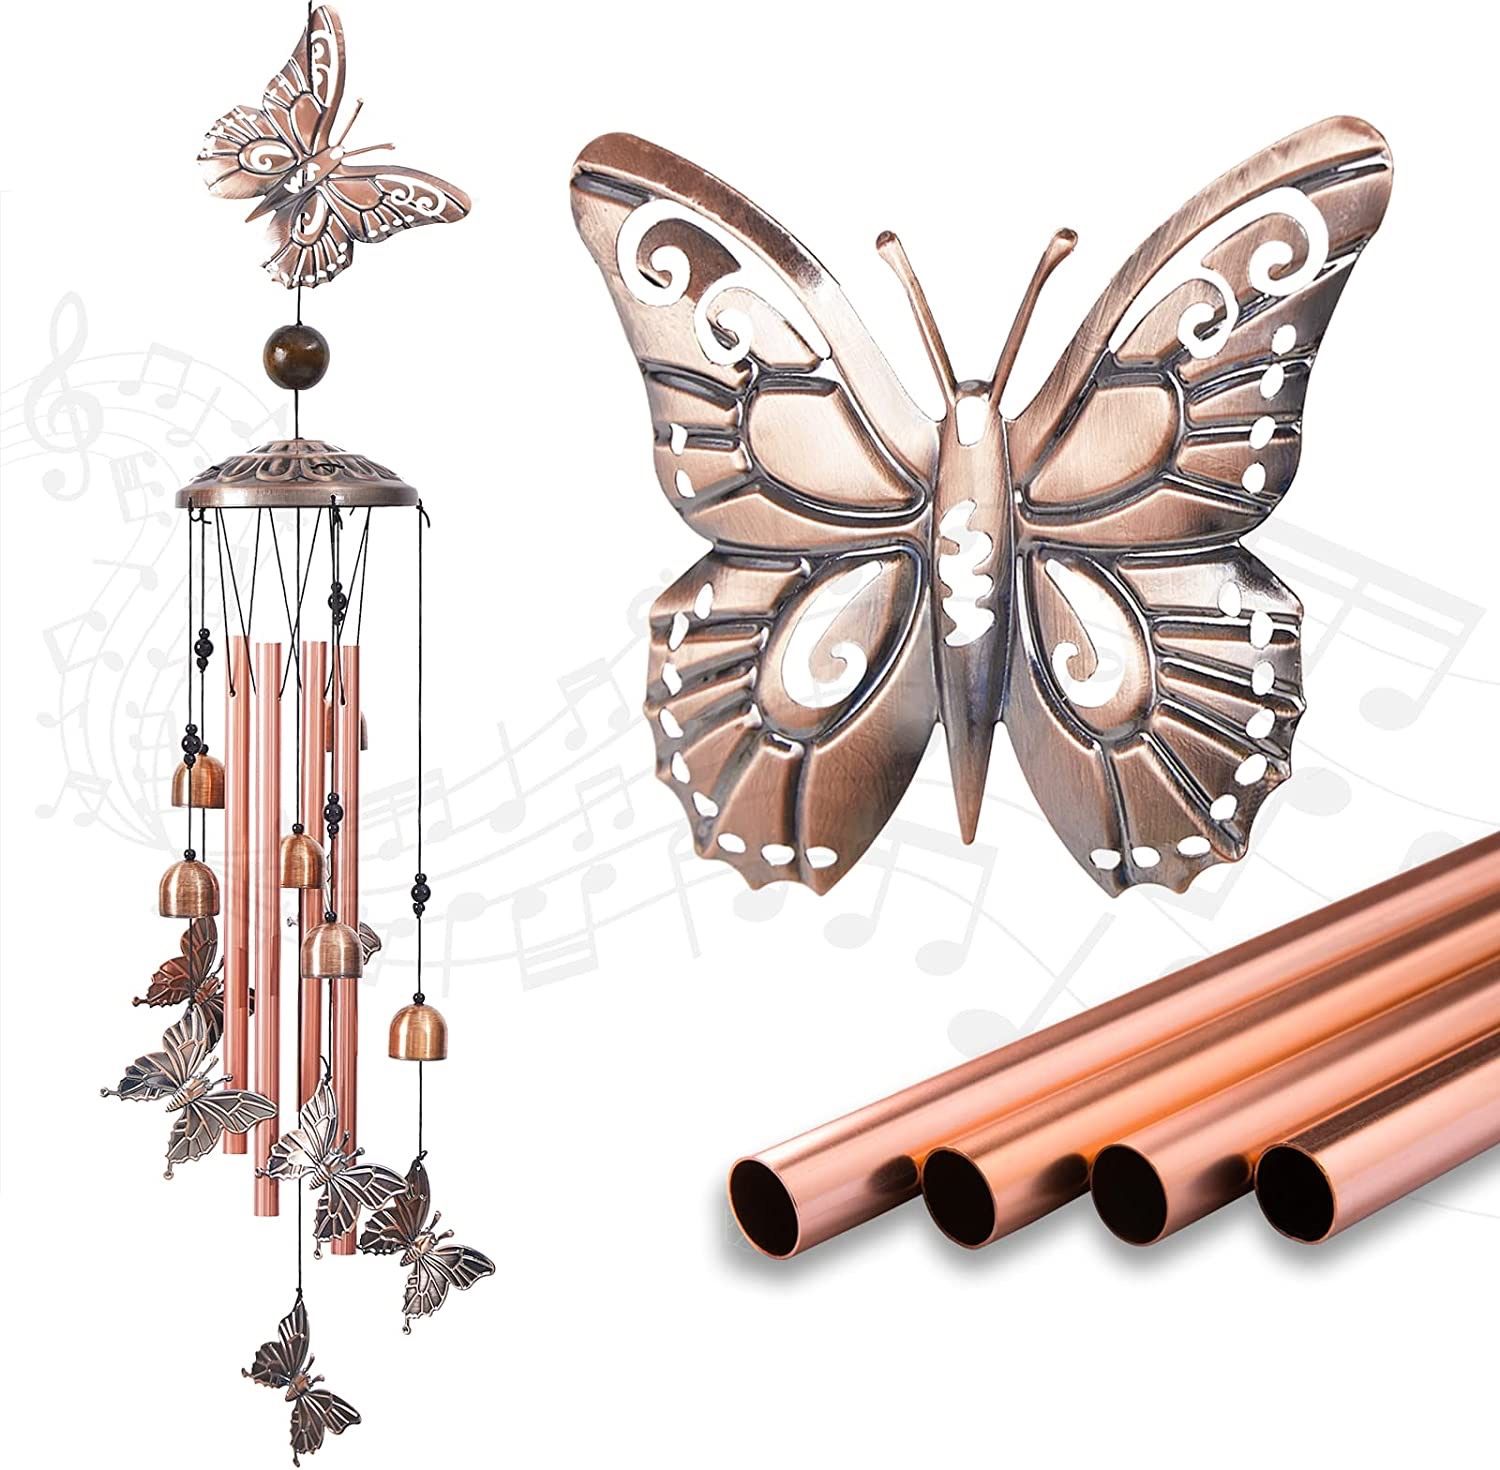 Wind Chimes Outdoor Clearance, Butterflies Aluminum Tube Windchime with S Hook,Patio Garden Decor, Housewarming Gift  Butterfly Wind chime: This handm